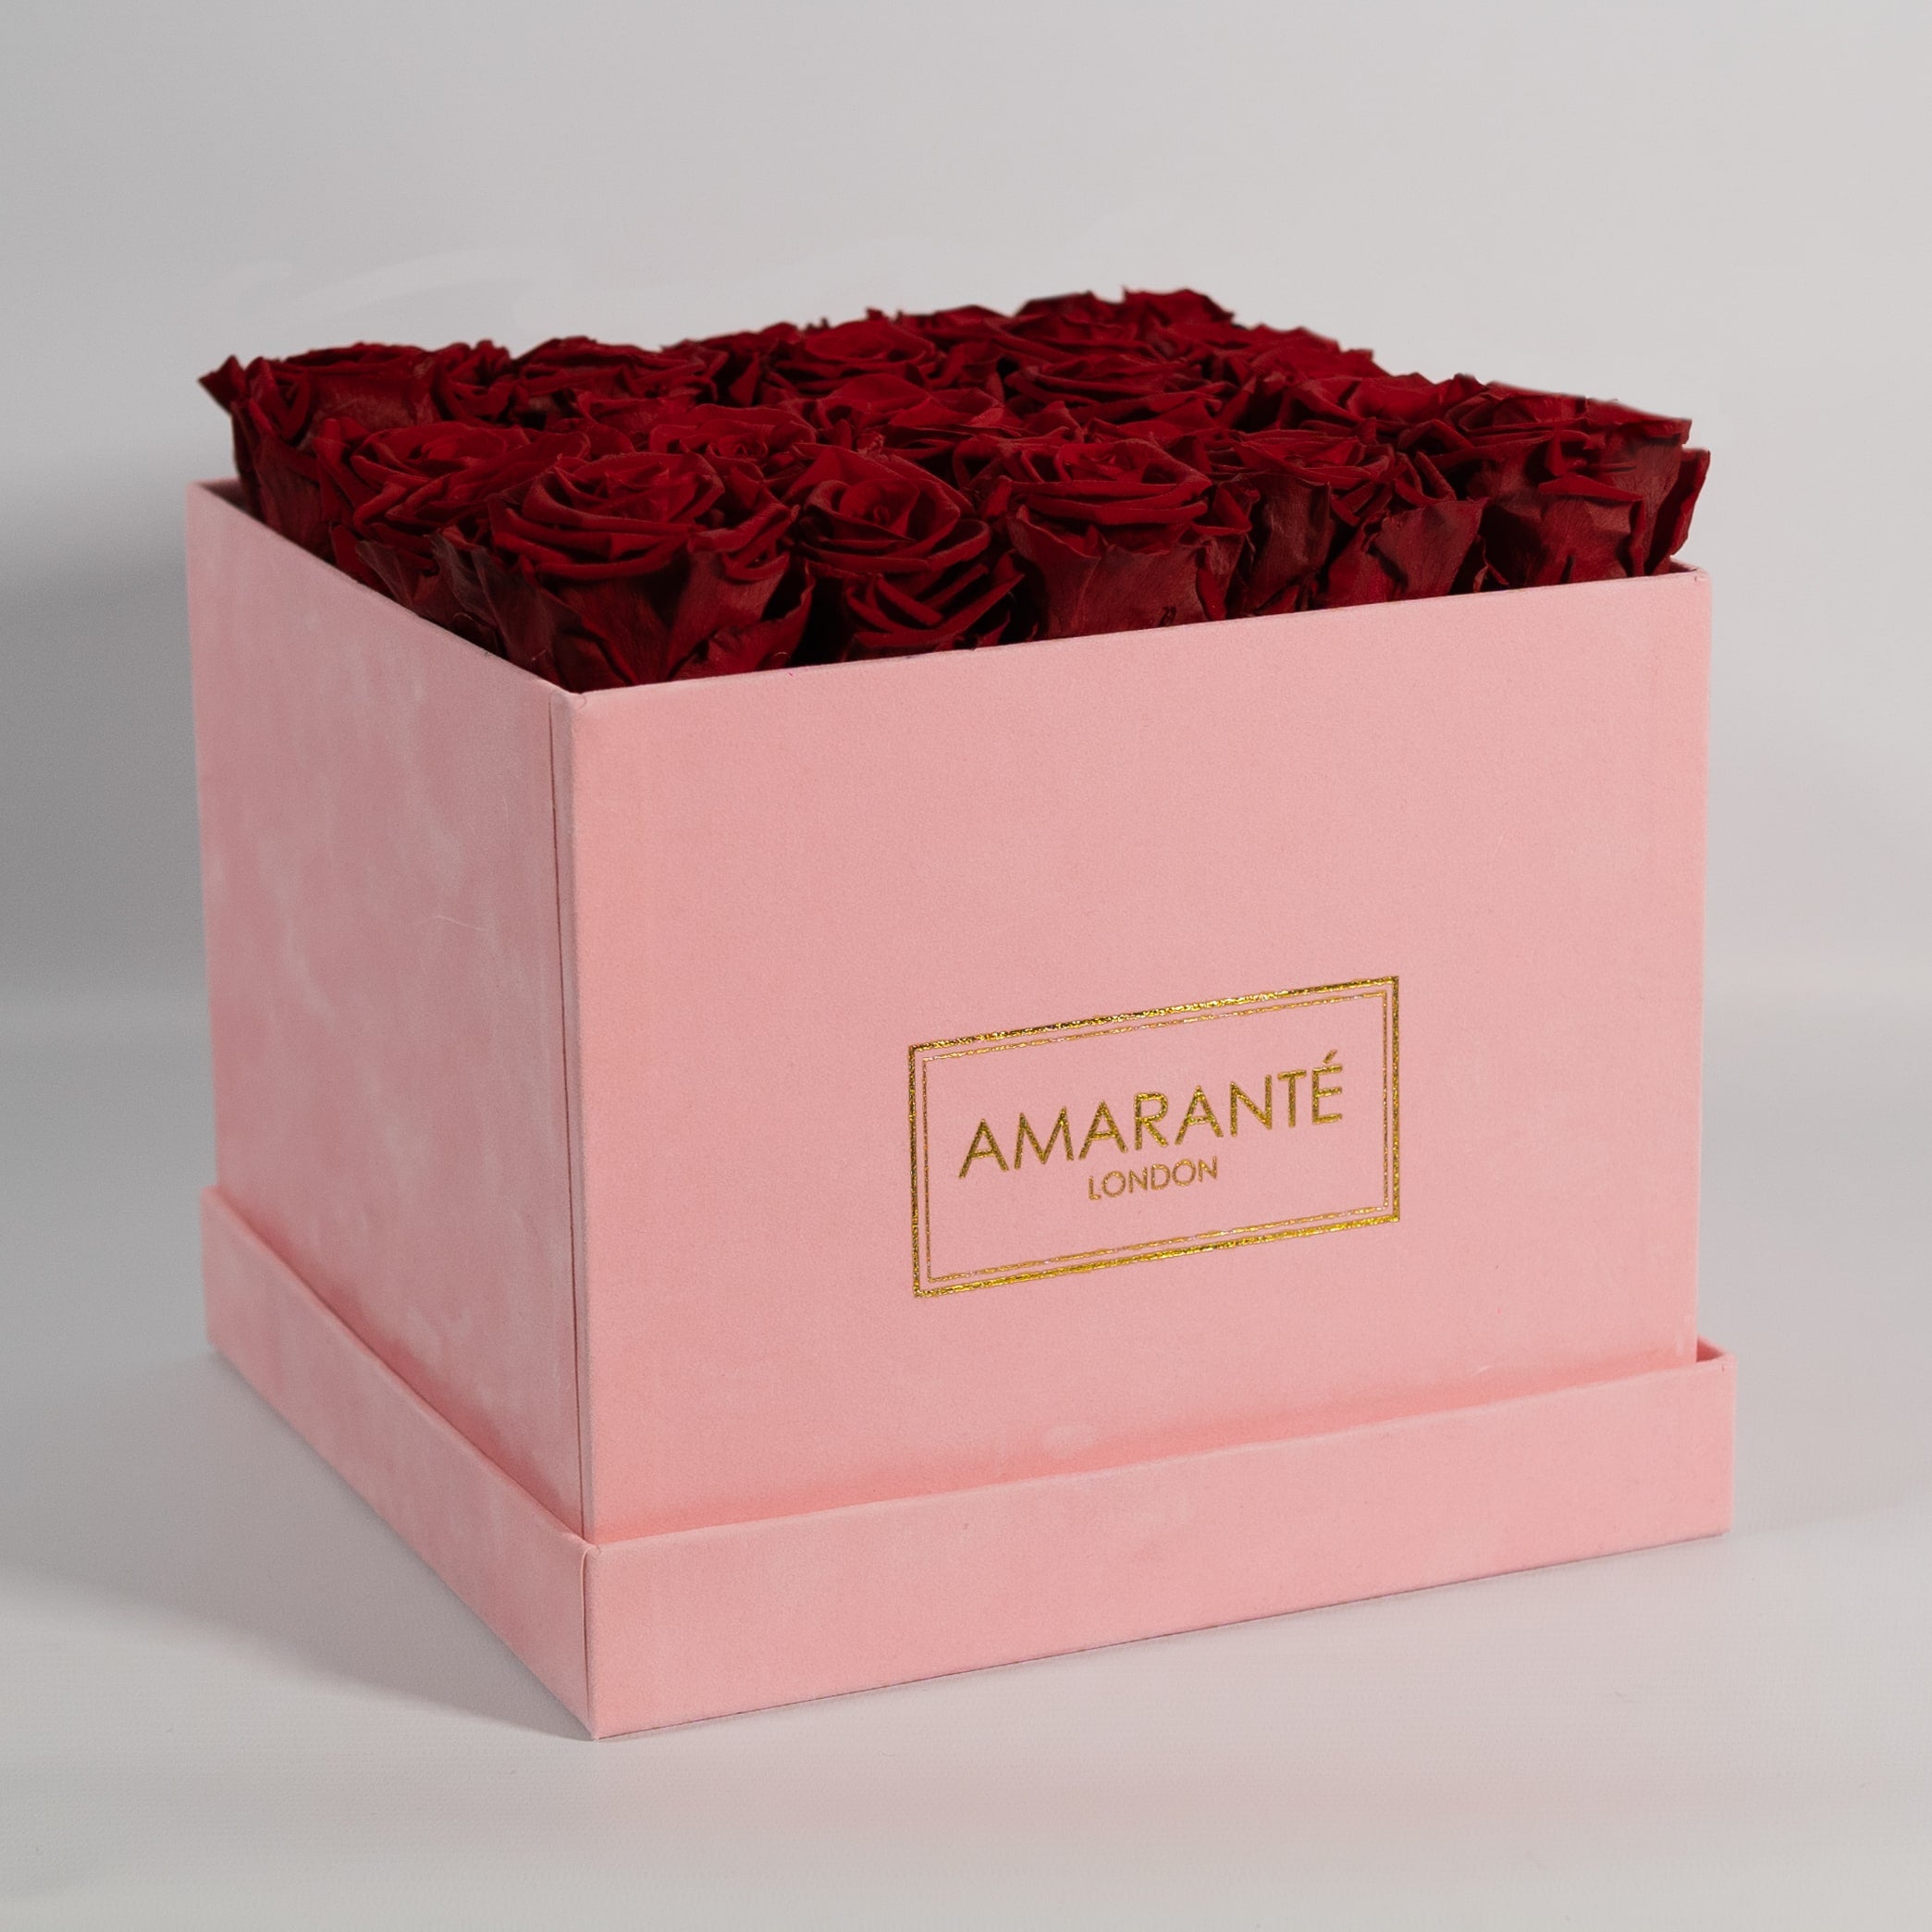 Amazing wine red roses featured in a blushing pink package 